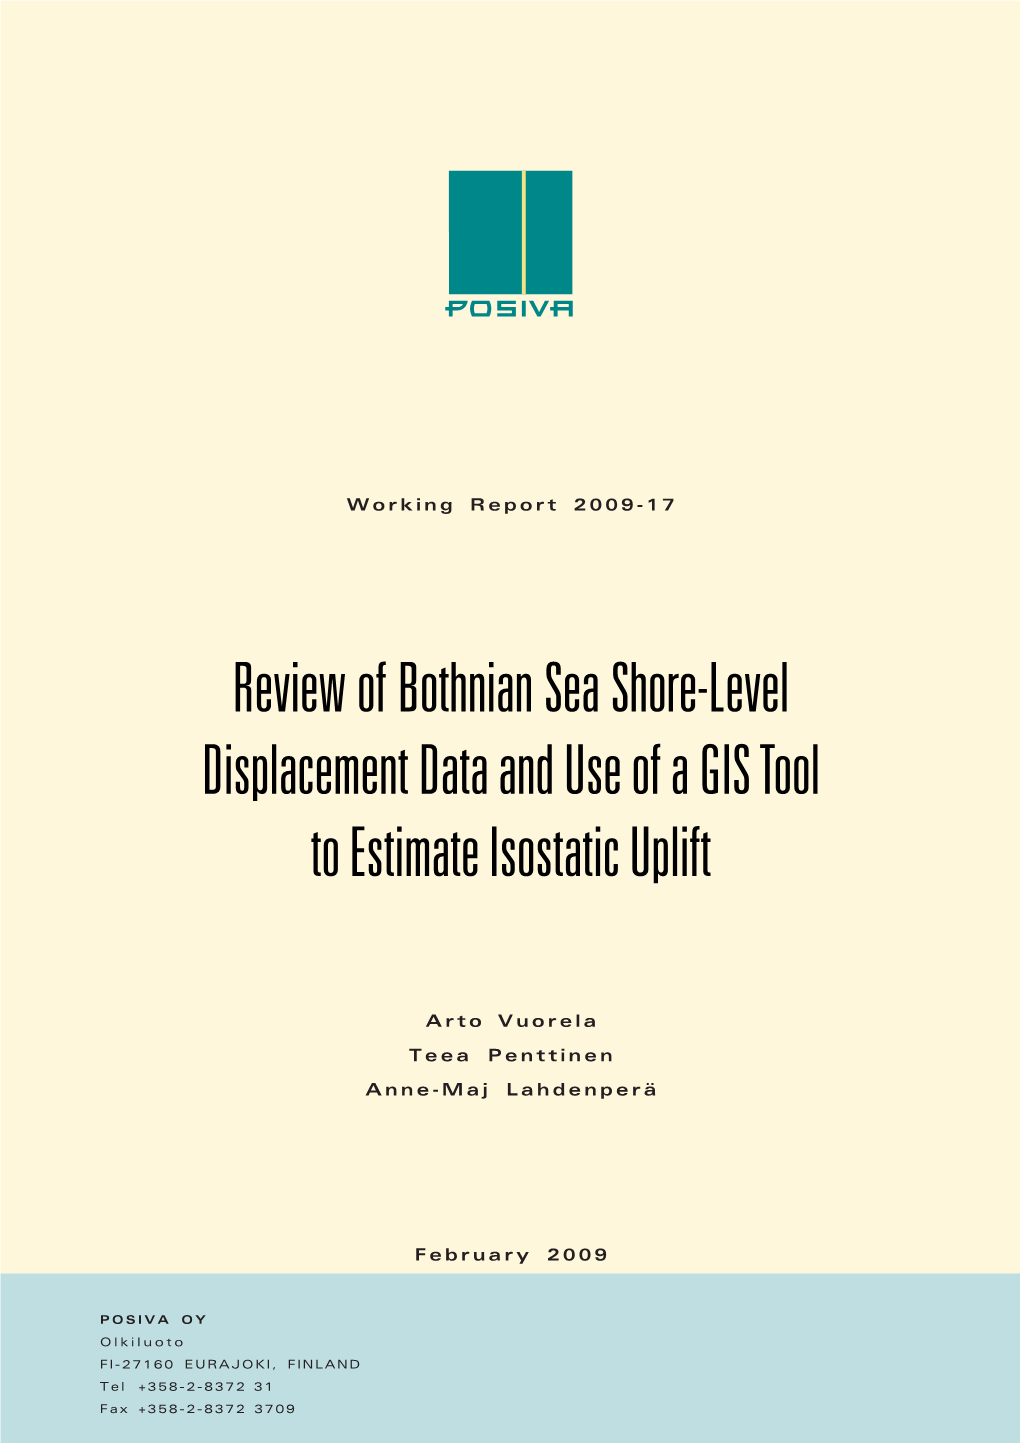 Review of Bothnian Sea Shore-Level Displacement Data and Use of a GIS Tool to Estimate Isostatic Uplift